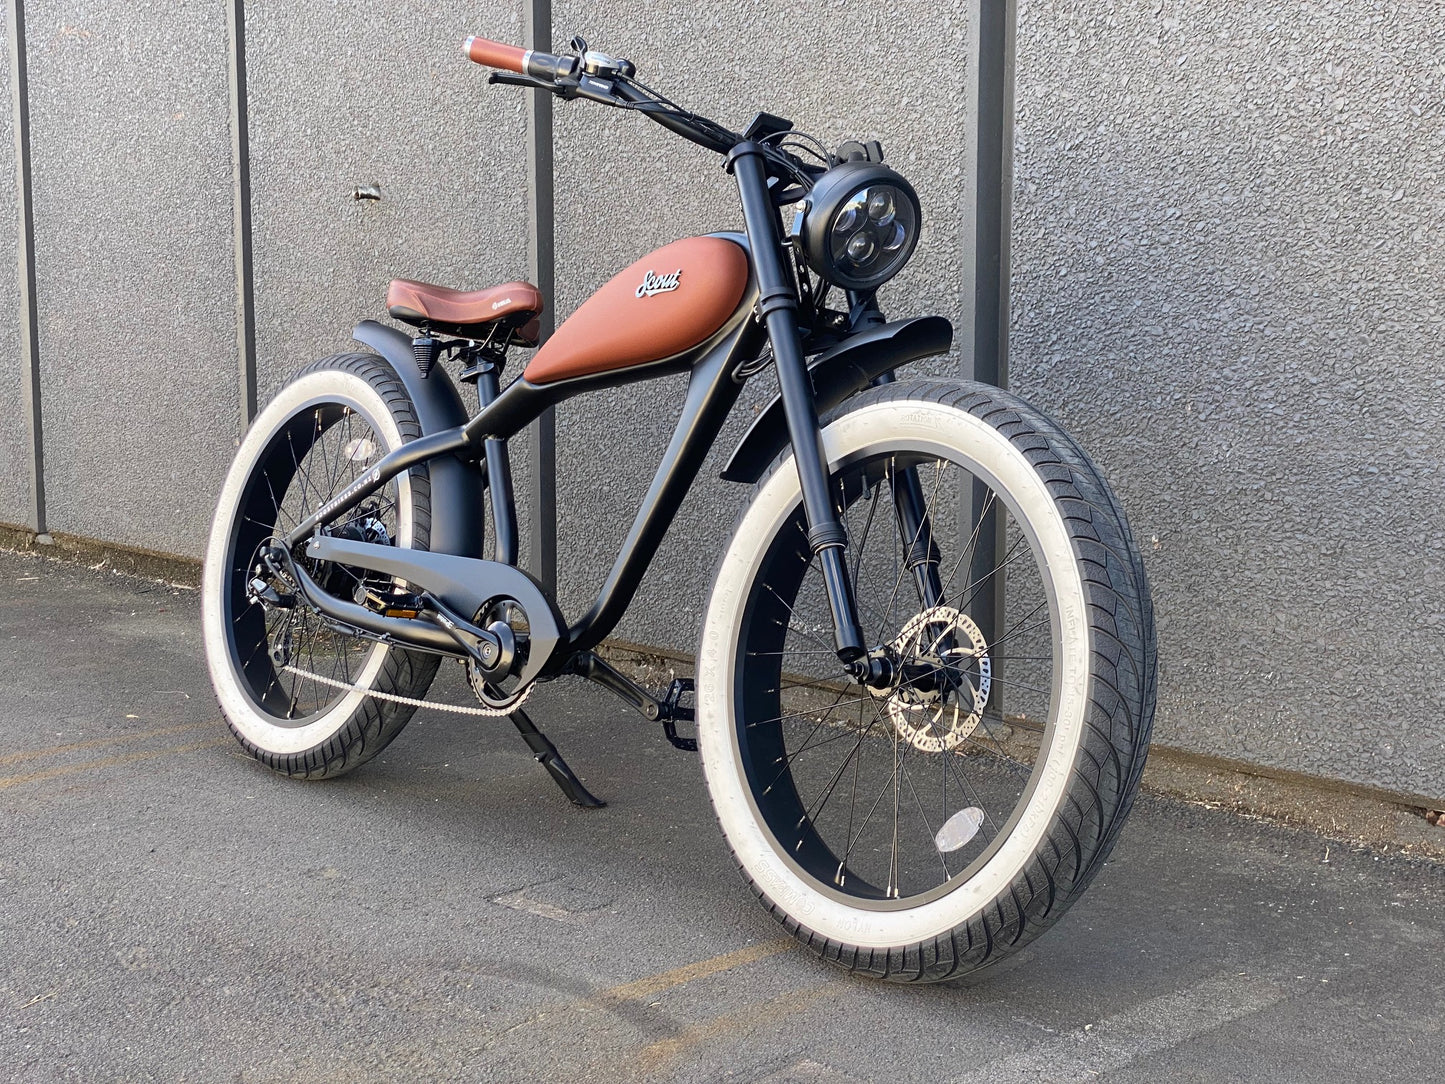 Electric motorbike Retro Cruiser motorbike styling, New Zealand's best electric pedal bikes. From Boostbikes